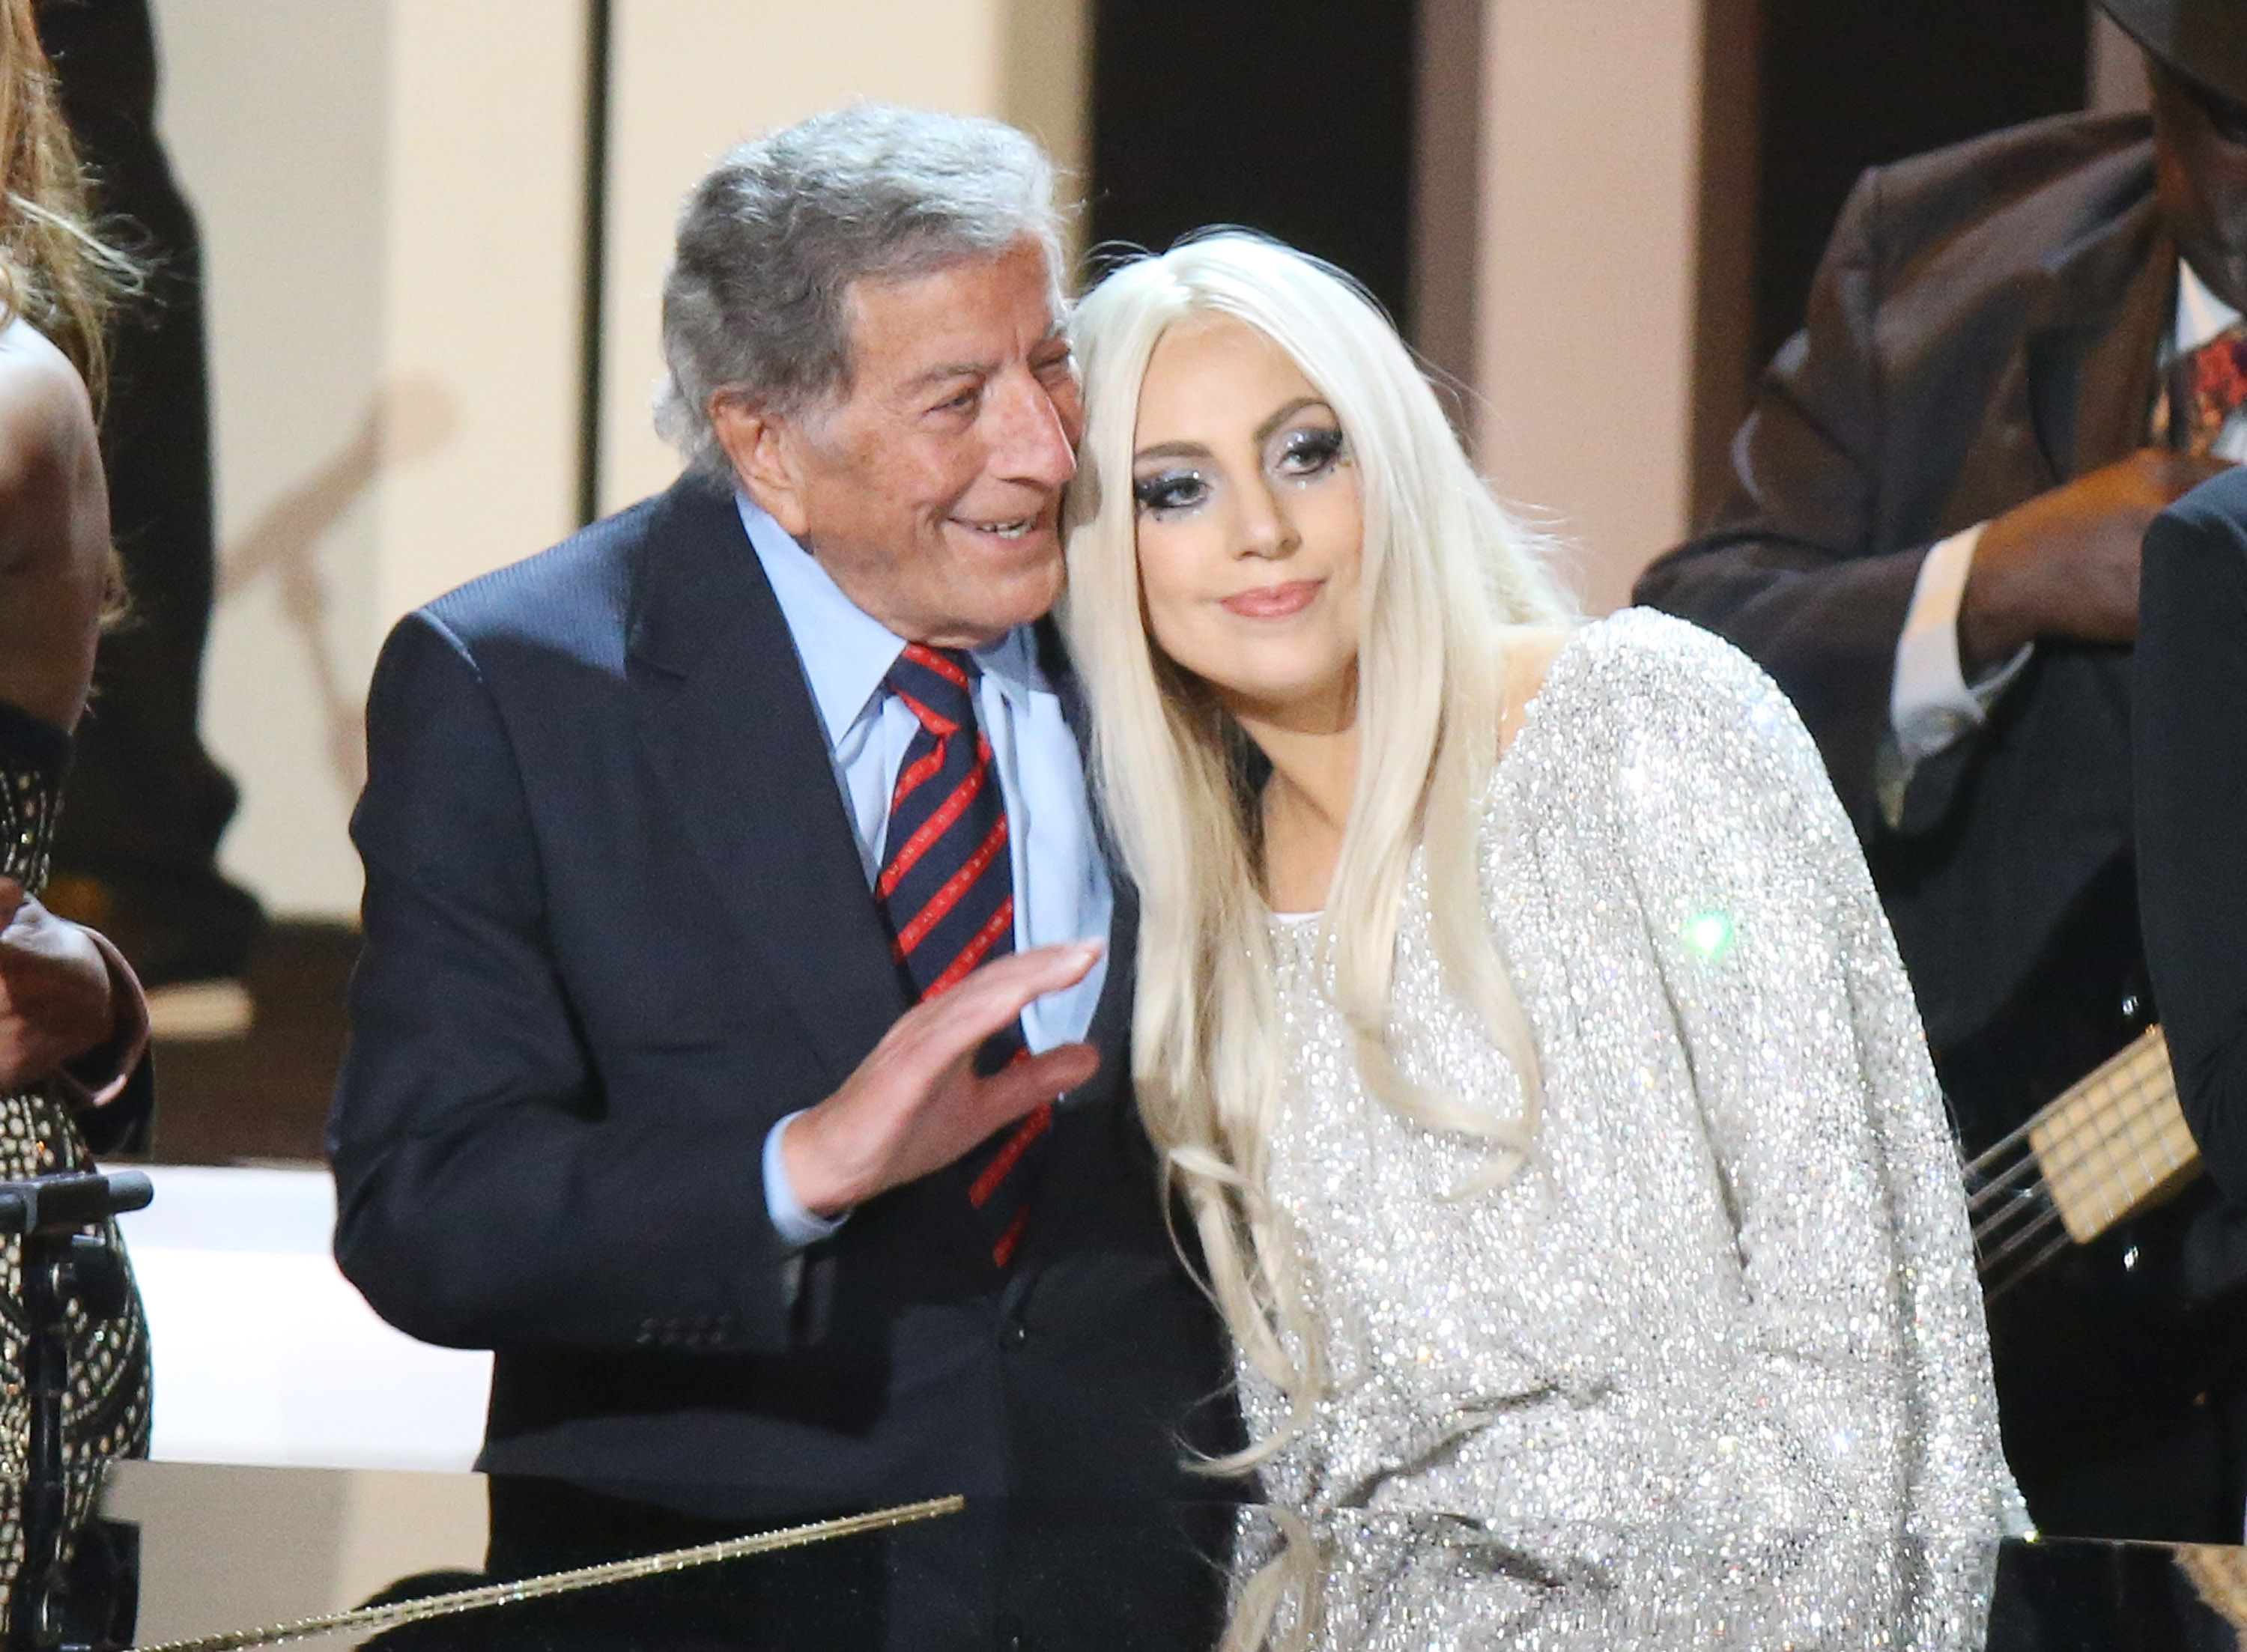 Tony Bennet and Lady Gaga stand close together on stage. He wears a suit and she wears a sparkly dress.